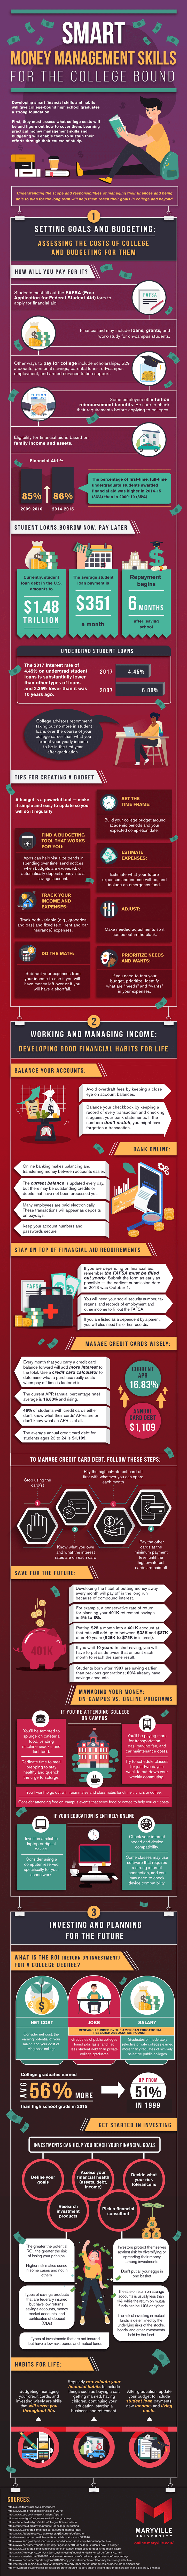 Money management infographic with essential tips for students to be financially wise